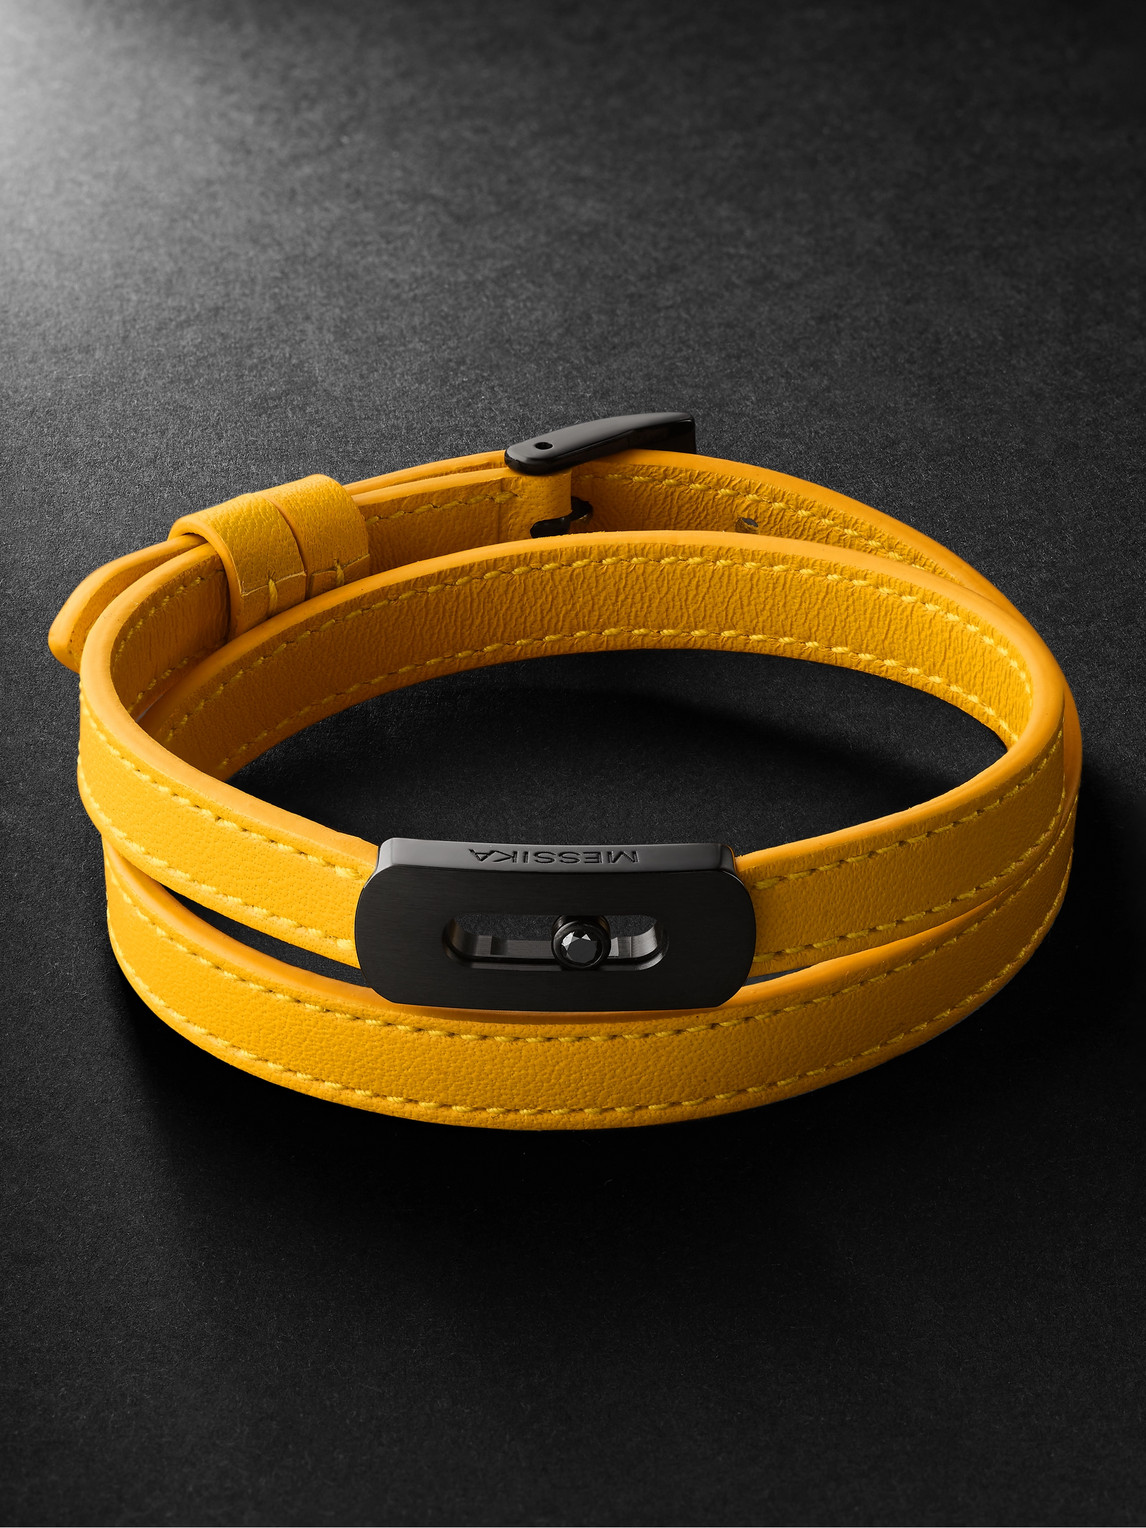 Messika - My Move DLC-Coated, Diamond and Leather Bracelet - Men - Yellow - L von Messika